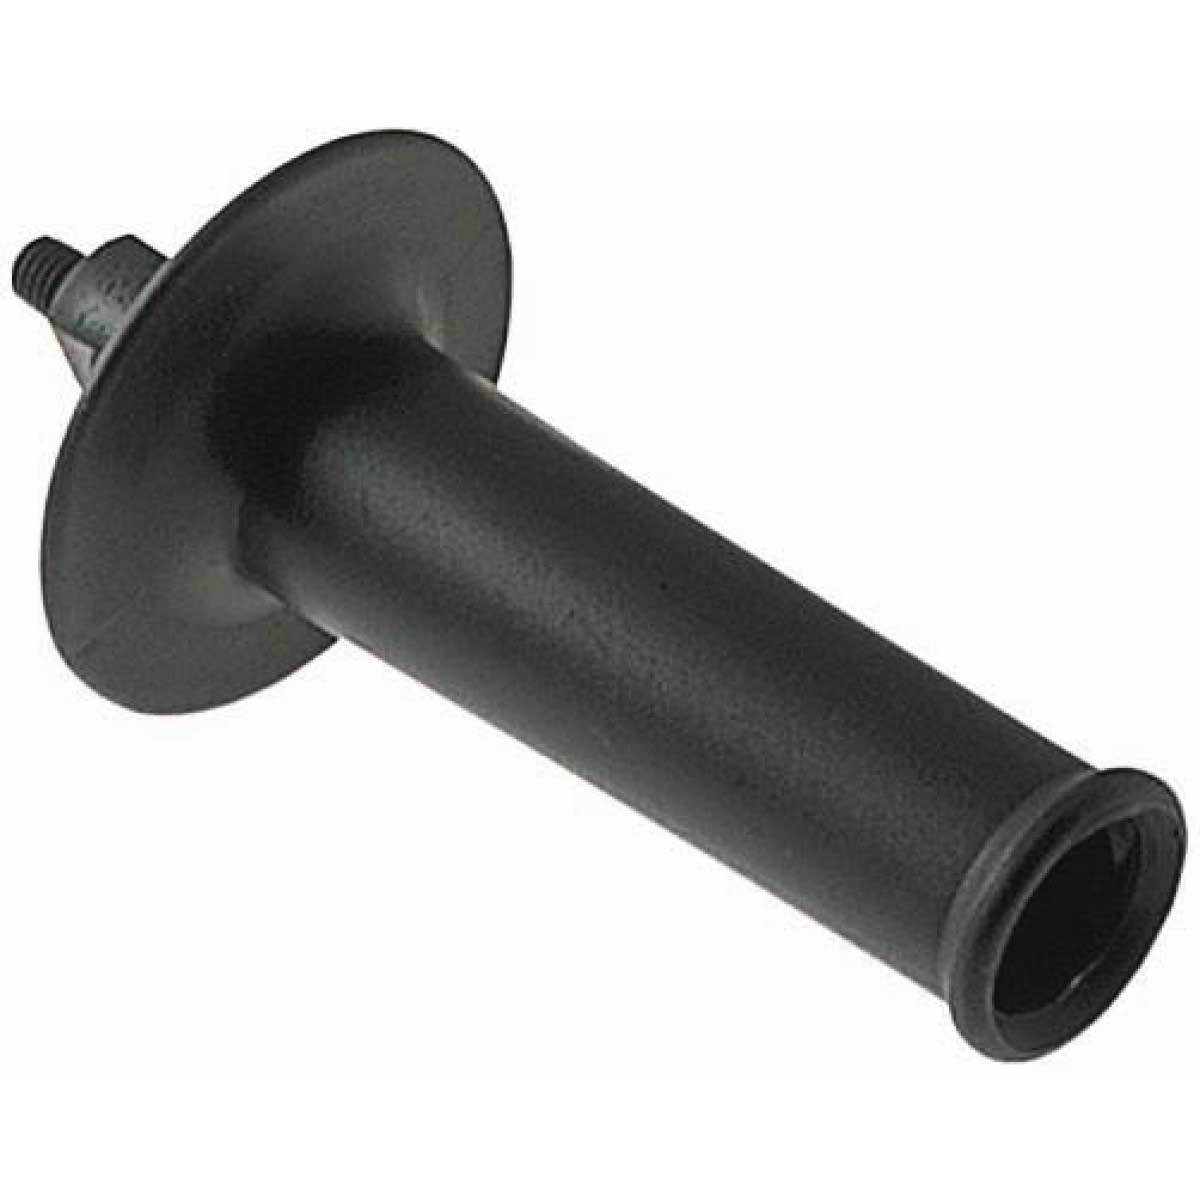 Auxilliary handle for RO 150 is made of high-quality plastic and has a metal threaded stud for mounting.